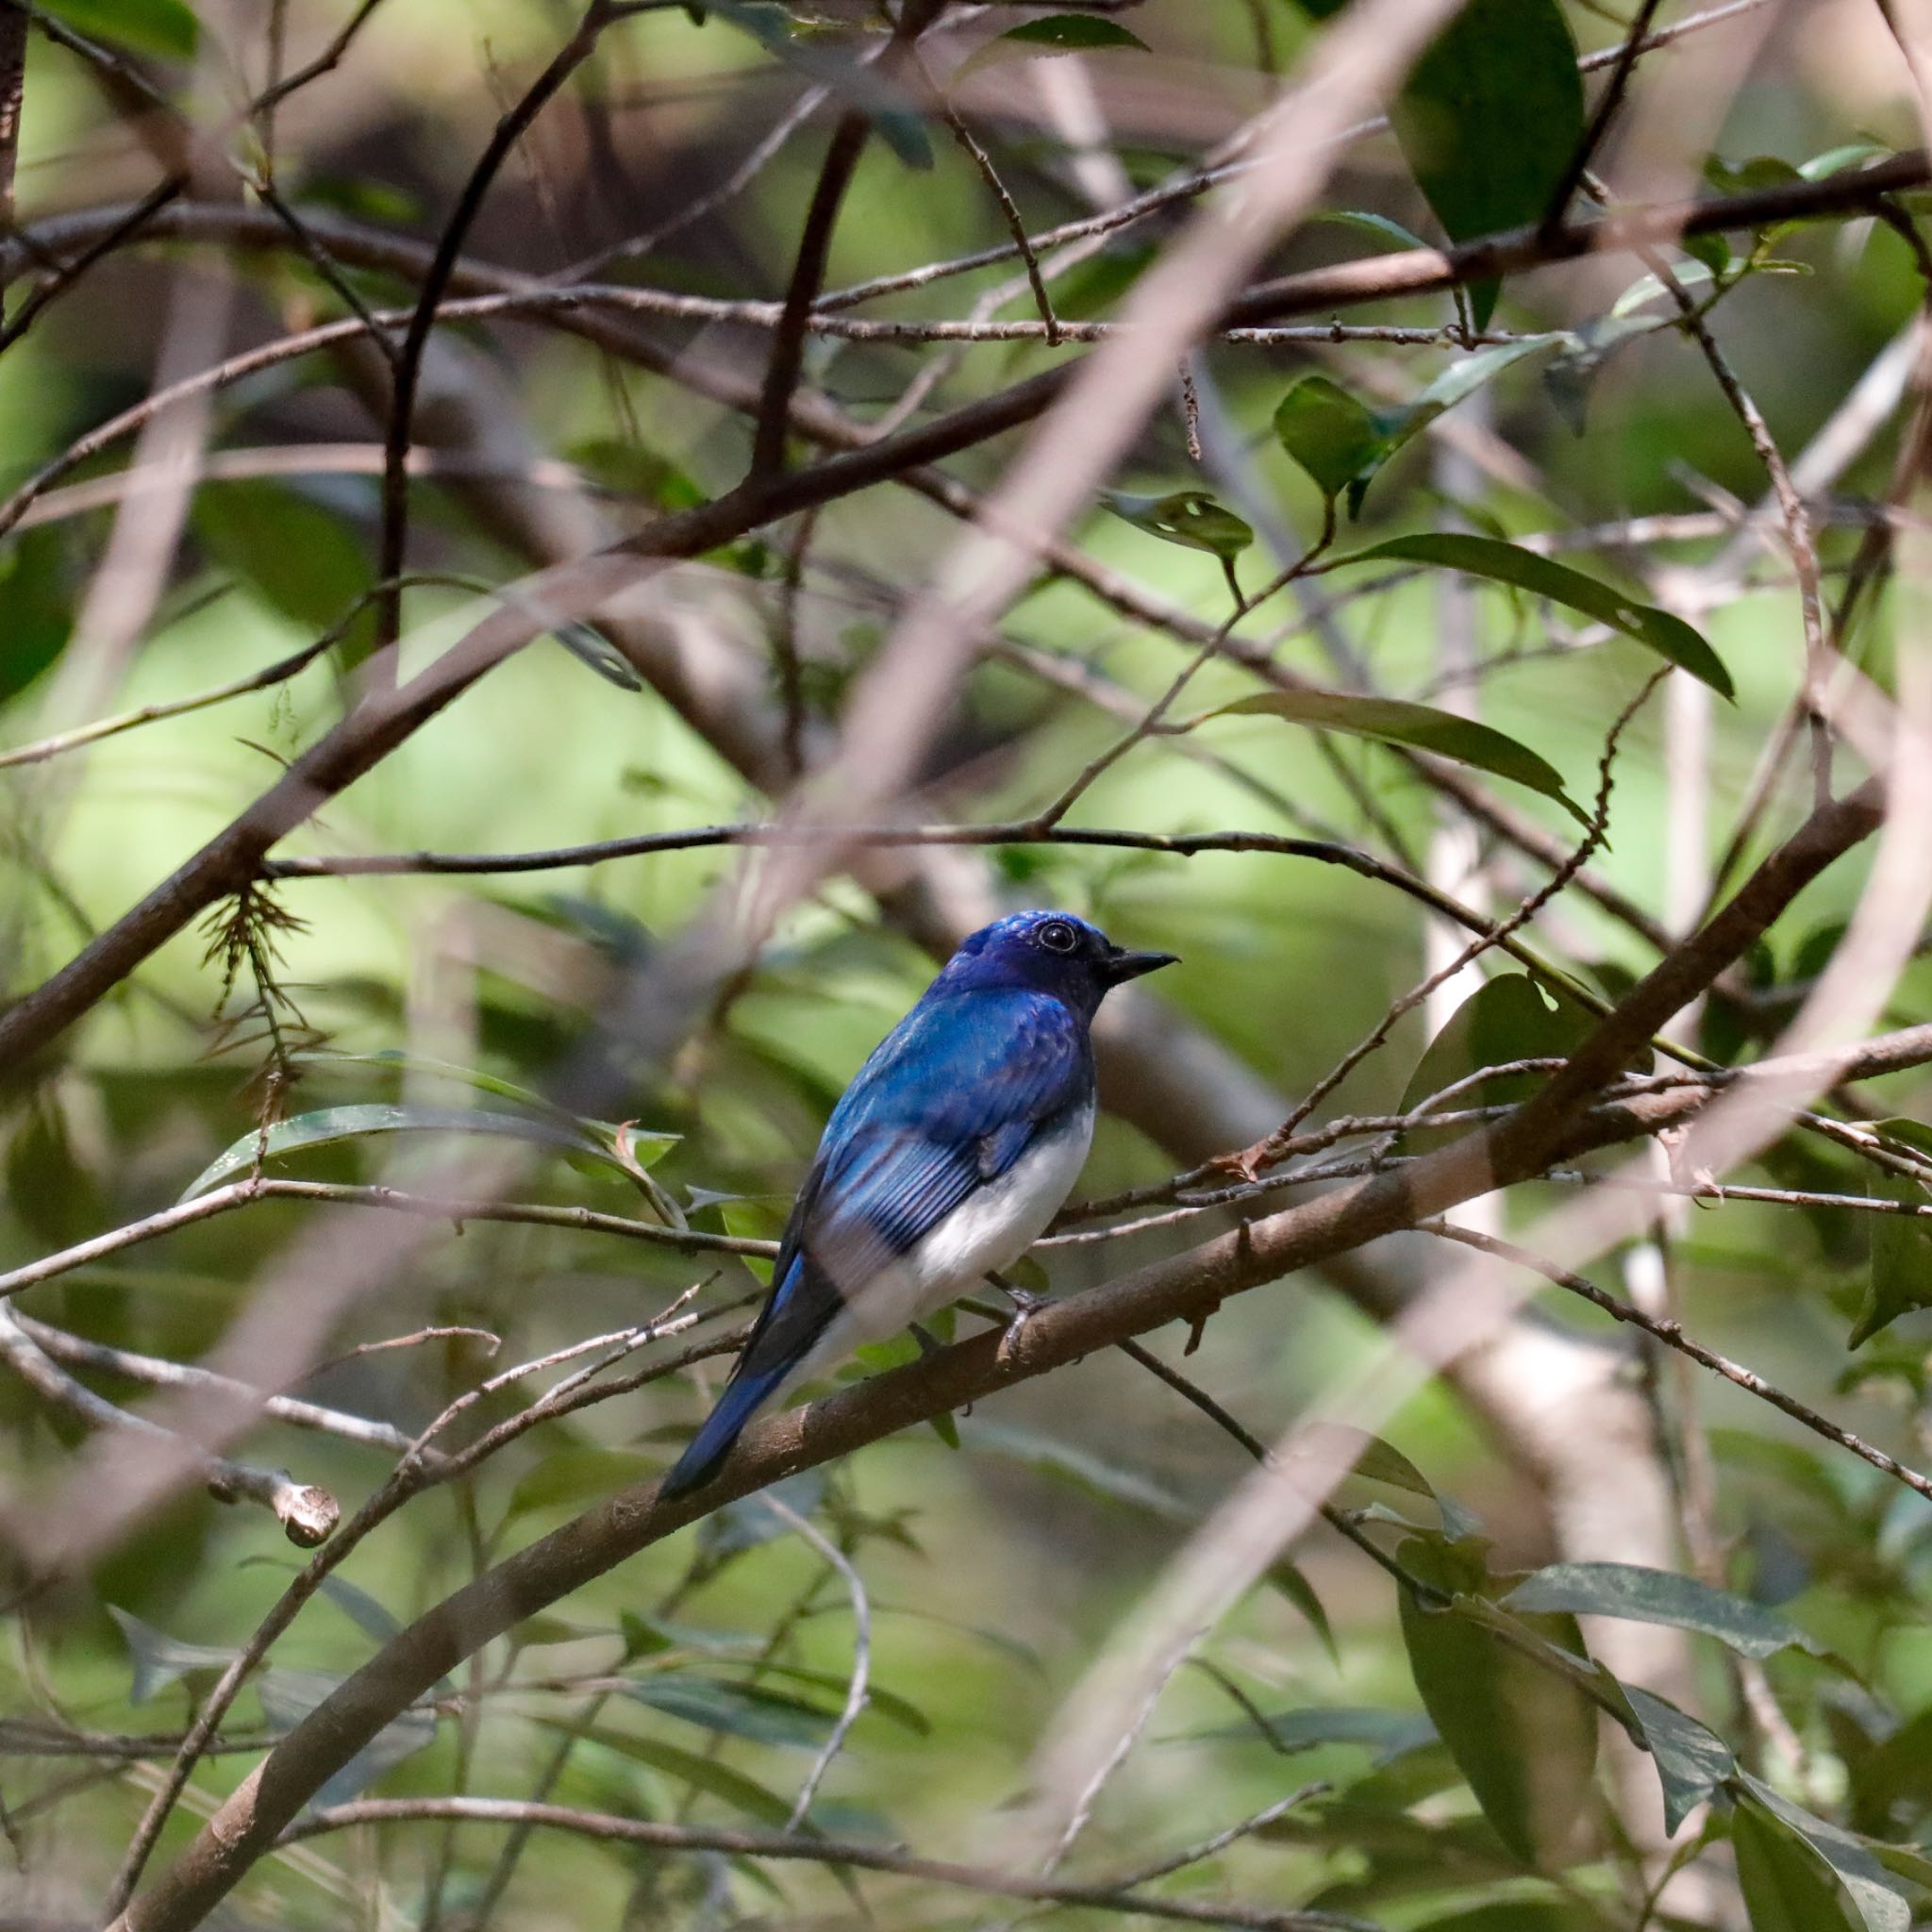 Photo of Blue-and-white Flycatcher at 愛知県 by Sakamoto